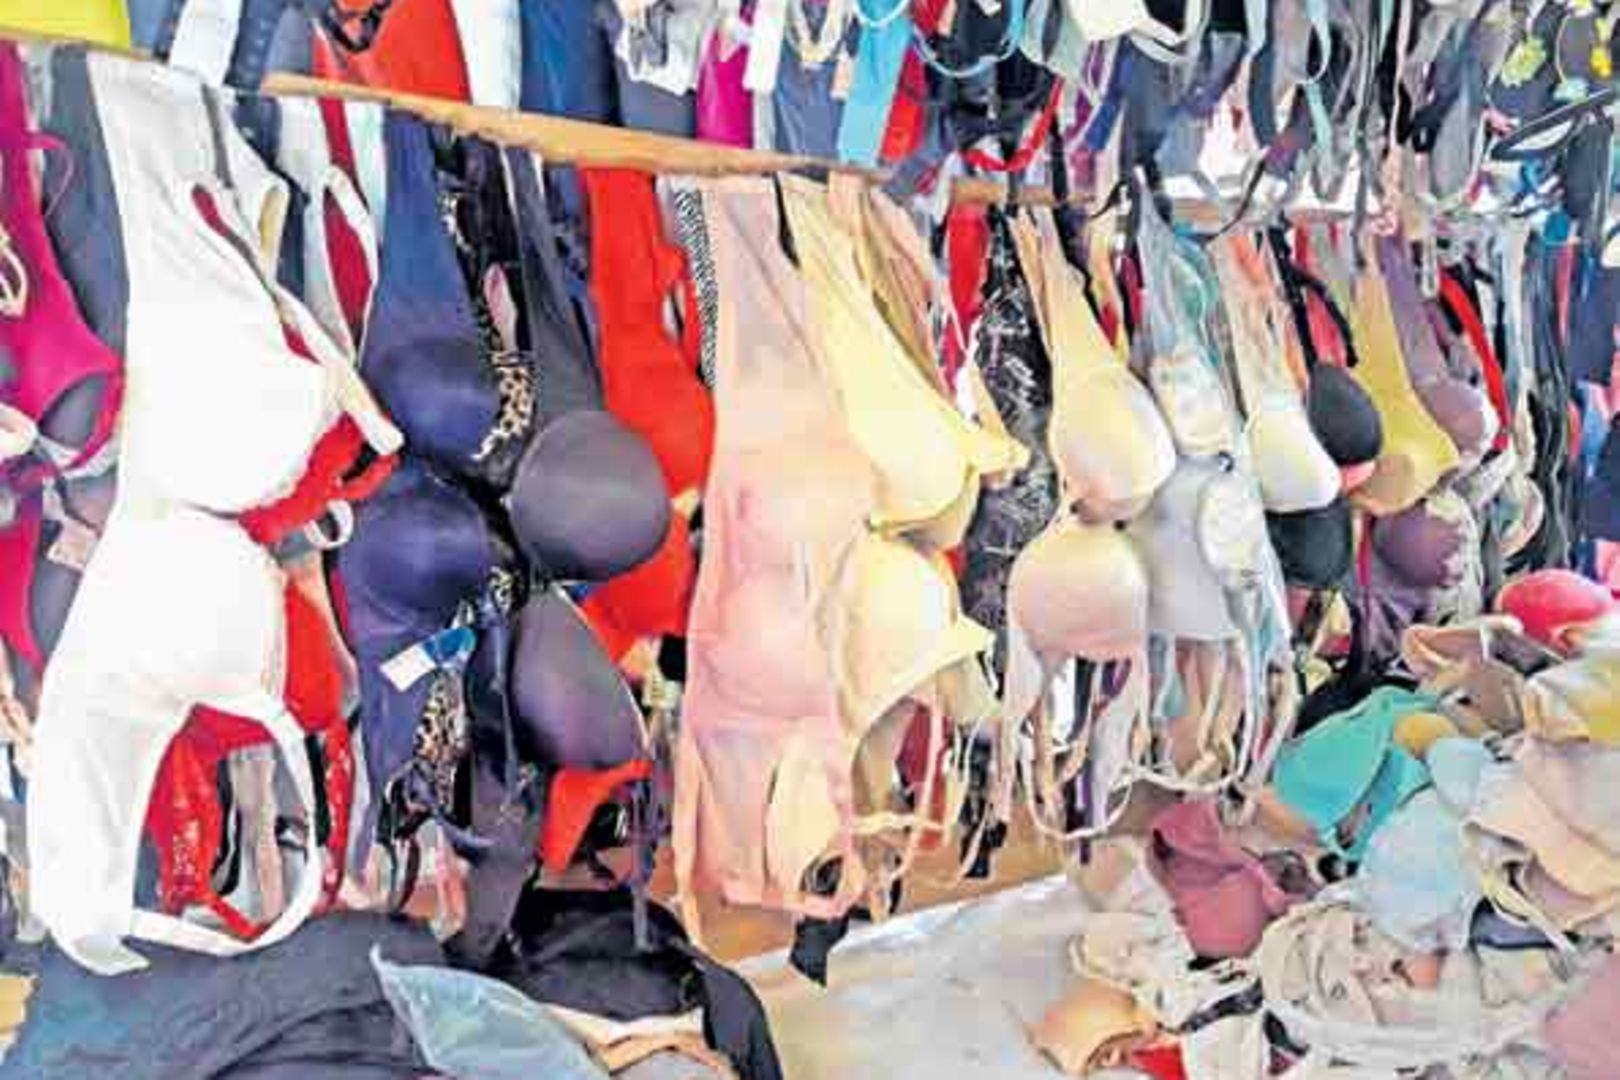 Zambia Daily Mail - Ban importation of second-hand underwear Zambia  National Men's Network for Gender and Development has called on Government  to ban the importation of second hand underwear alleging that it